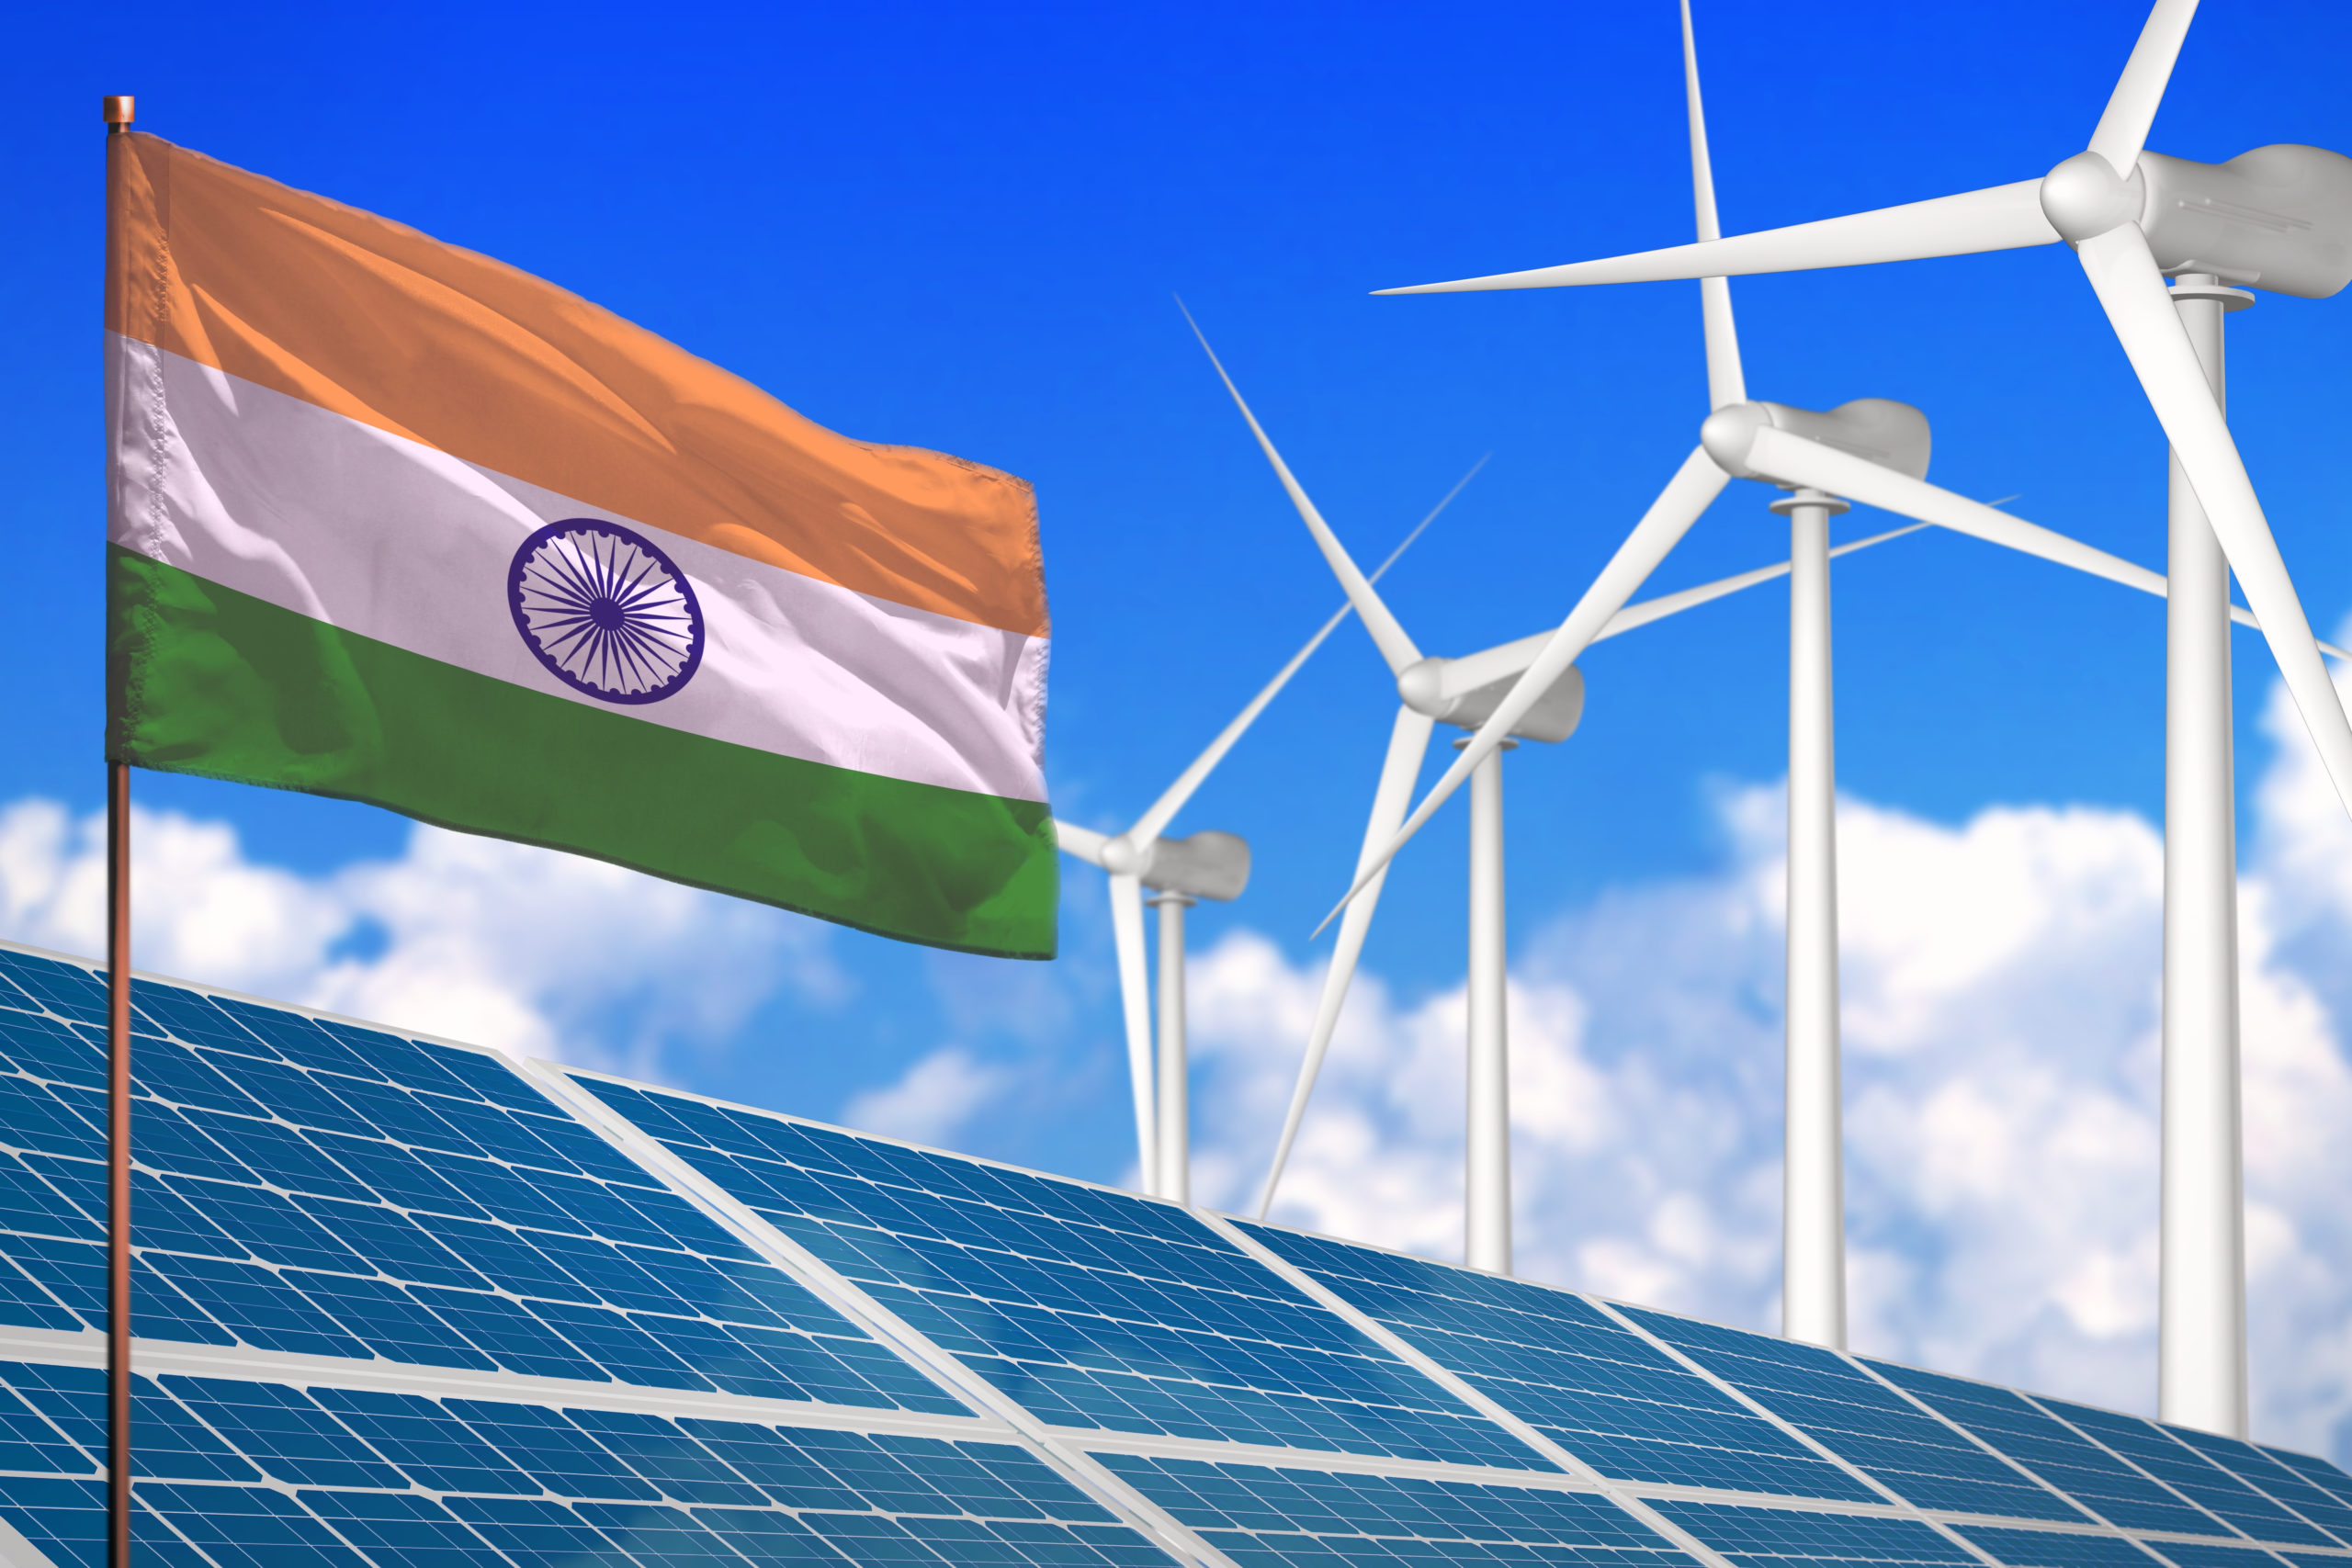 India’s wind market could expand by 50% over next five years